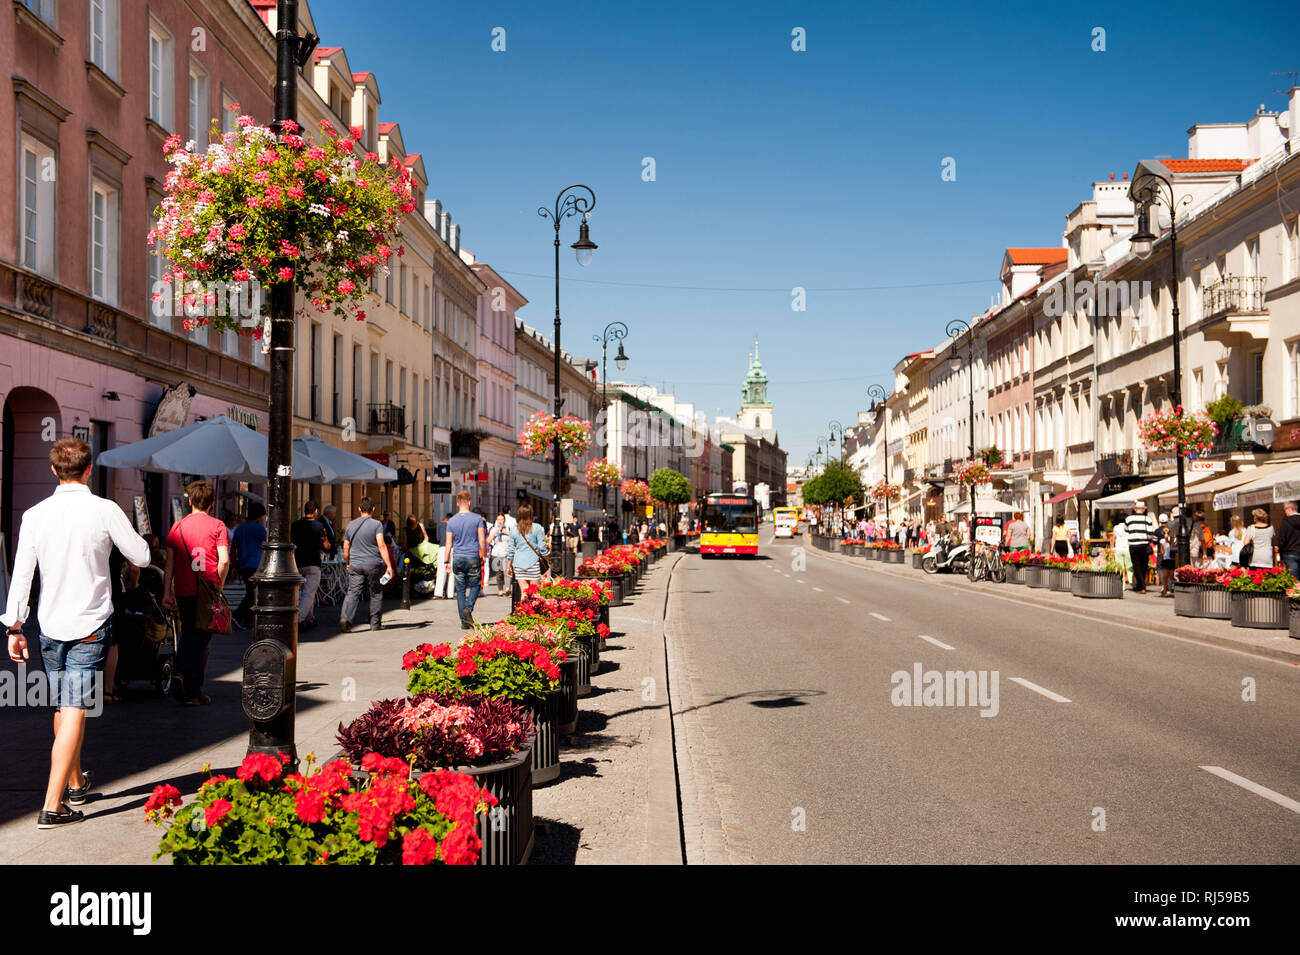 Red geranium flowers planted along street, people walking on sidewalk at Nowy Swiat in Warsaw, Poland, summertime, Stock Photo